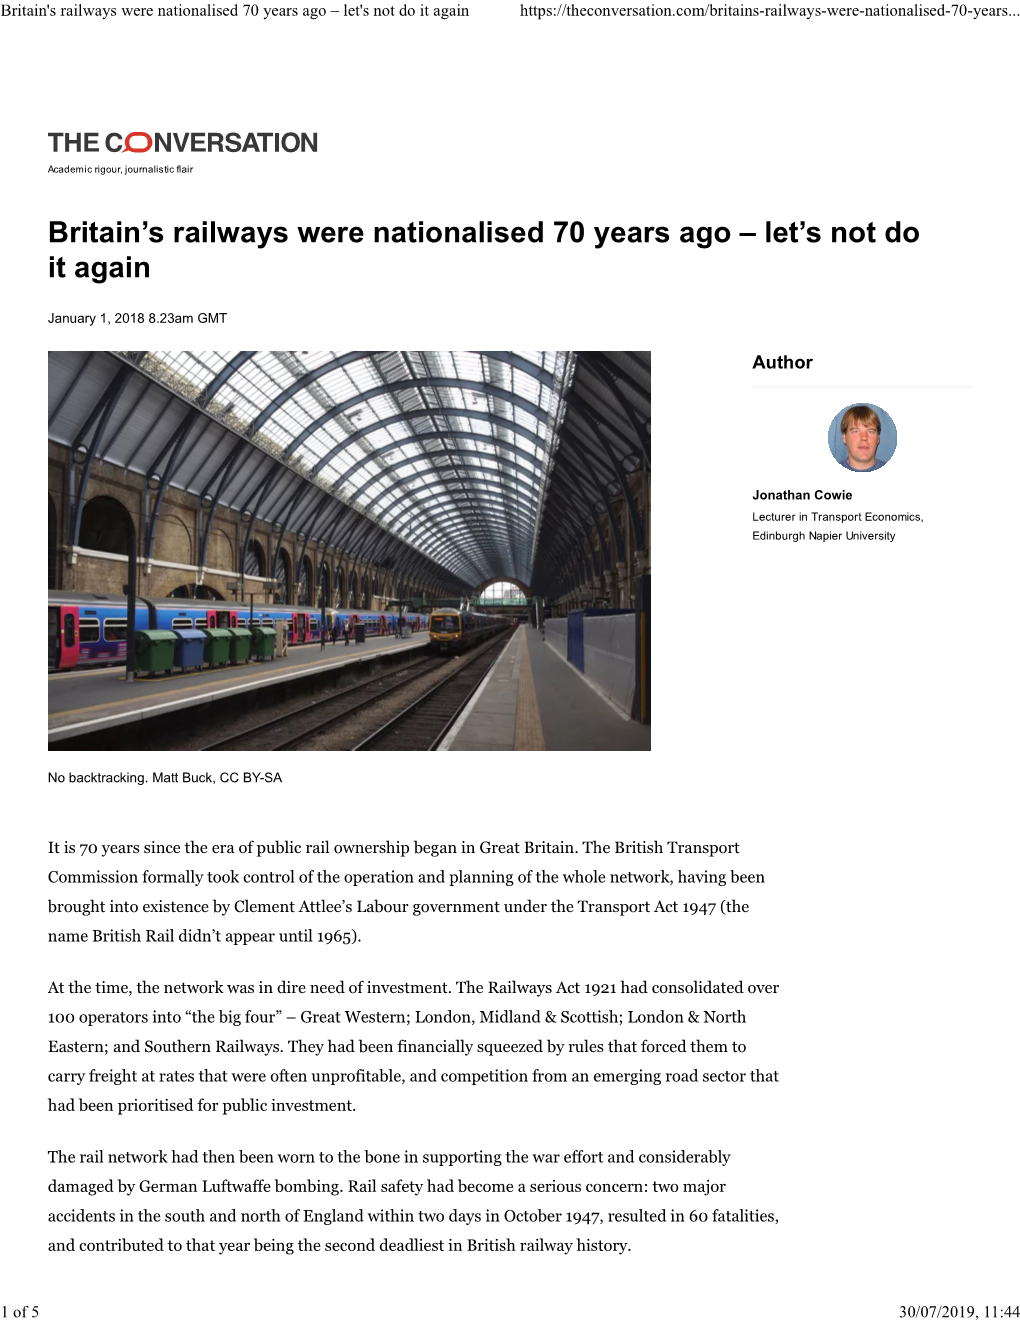 Britain's Railways Were Nationalised 70 Years Ago – Let's Not Do It Again